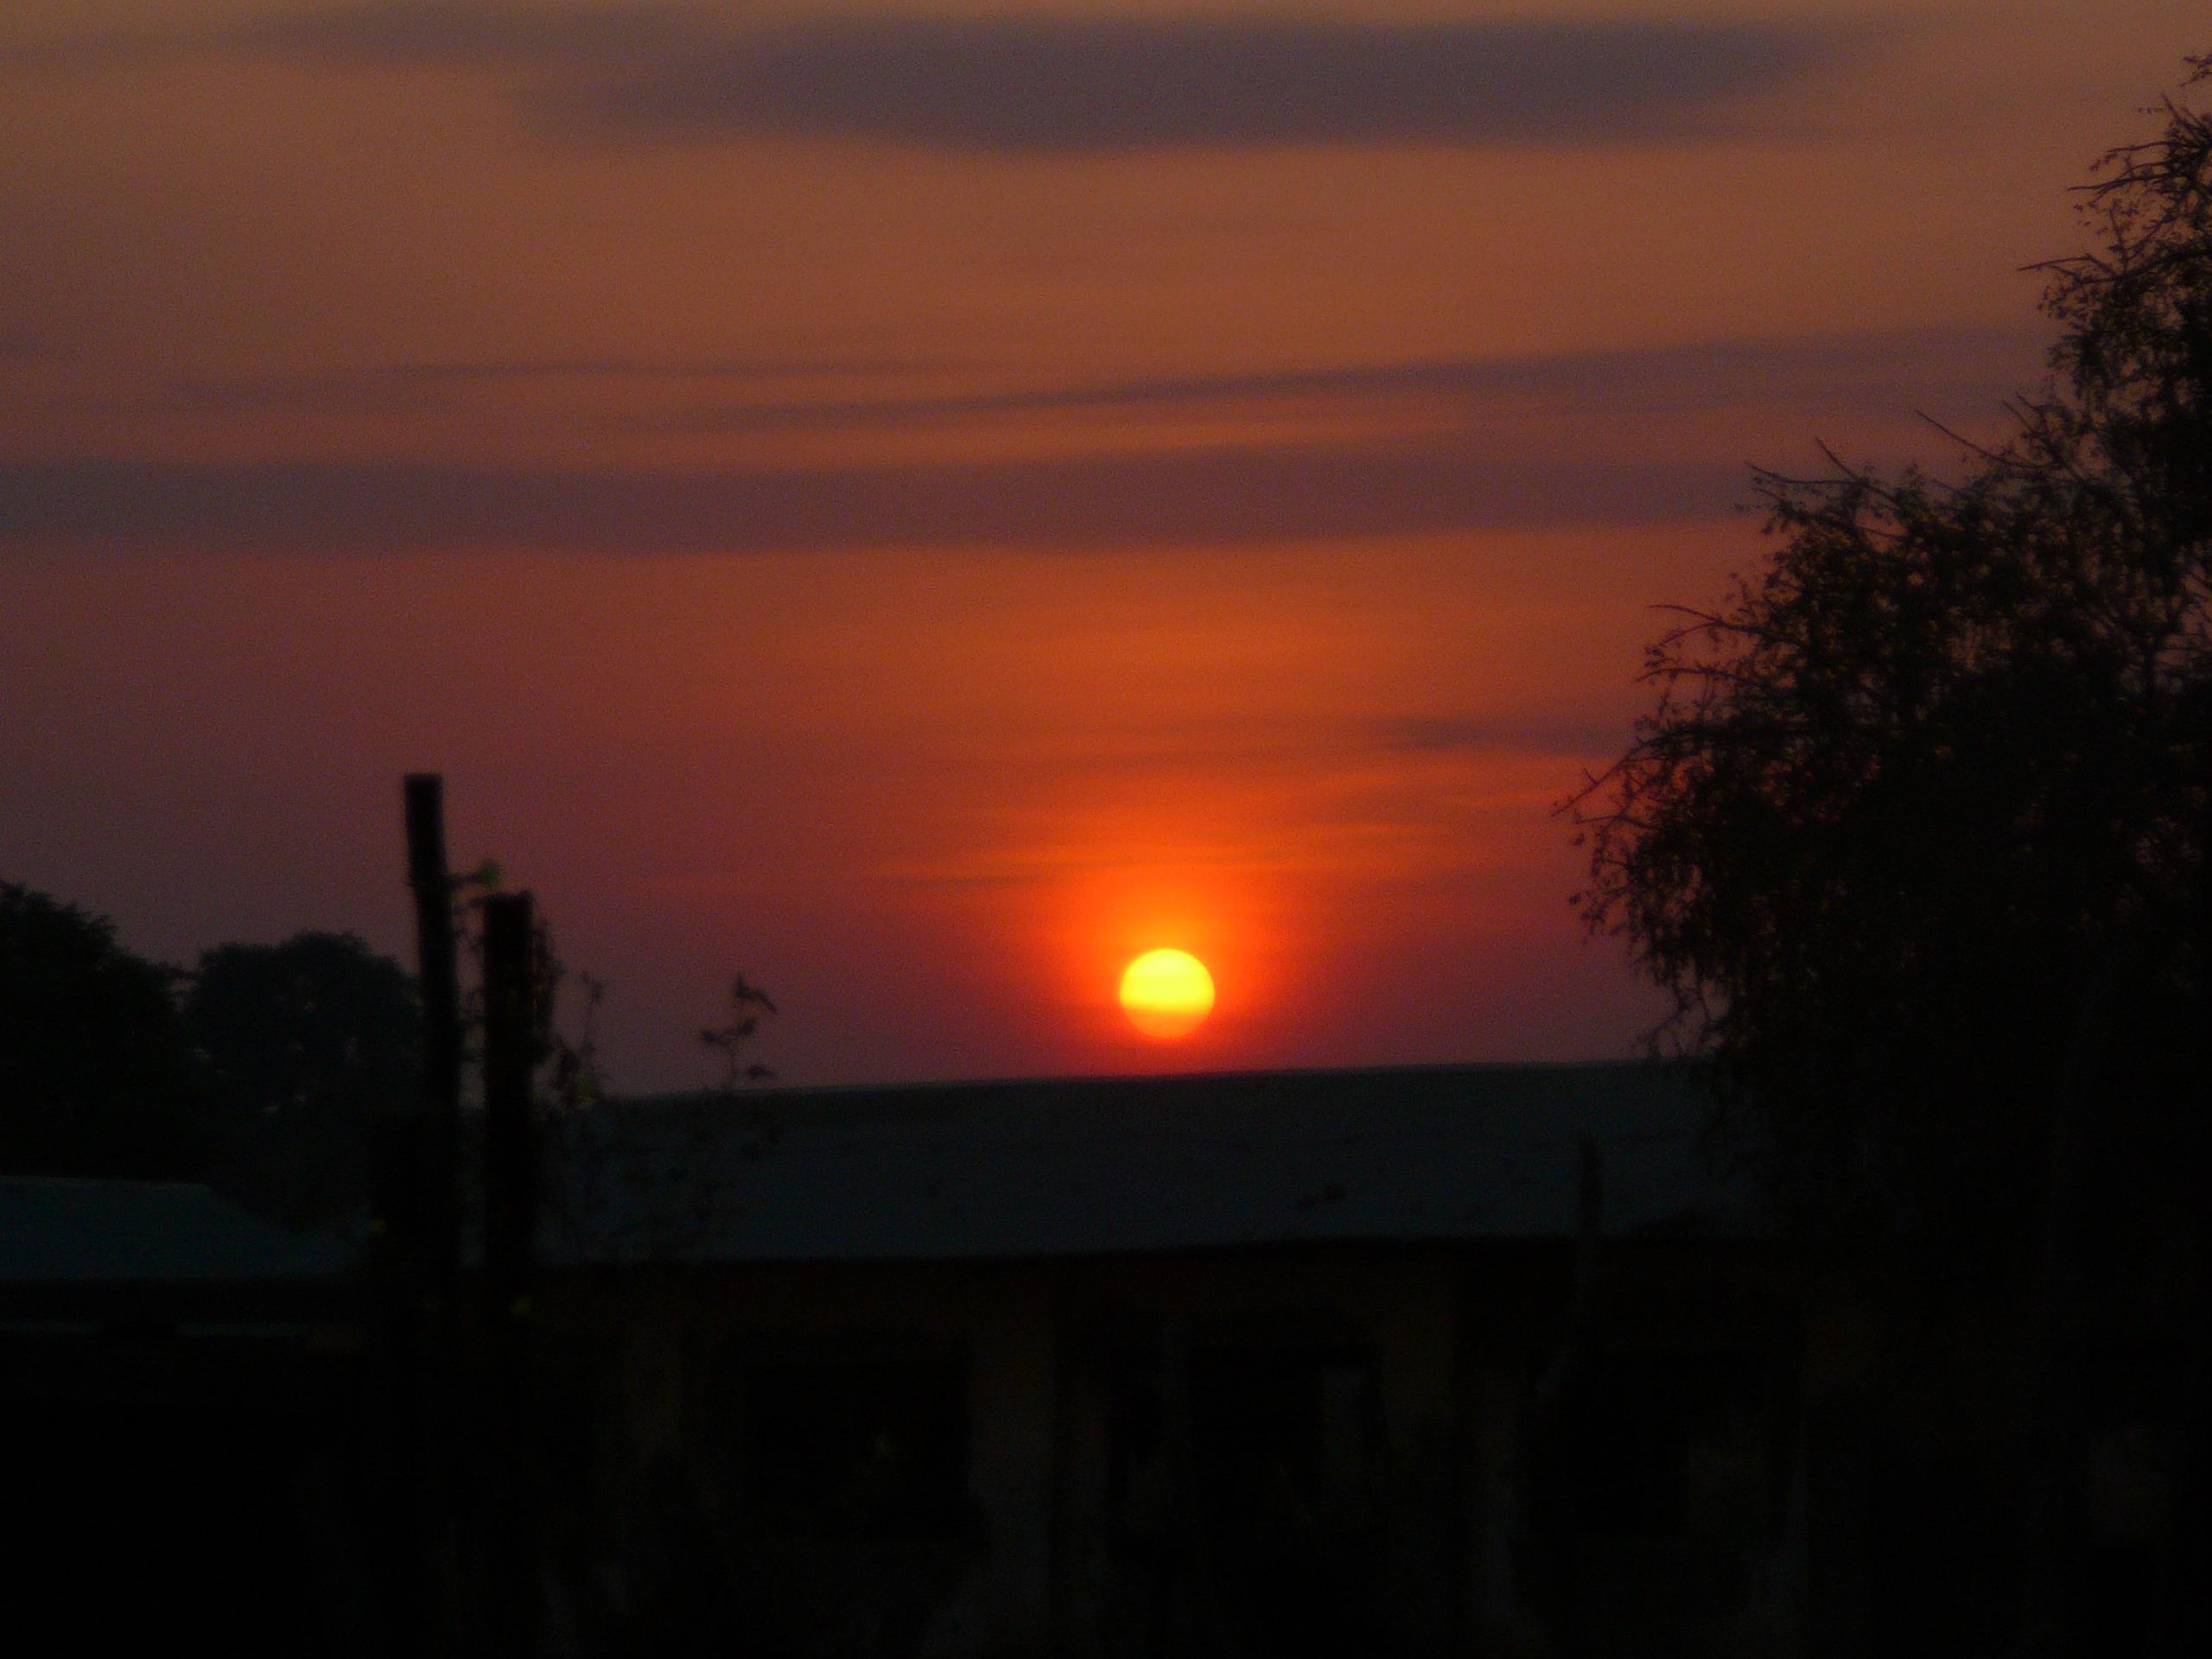 Sunset in South Sudan. Photo credit: flickr/ Tucky2010